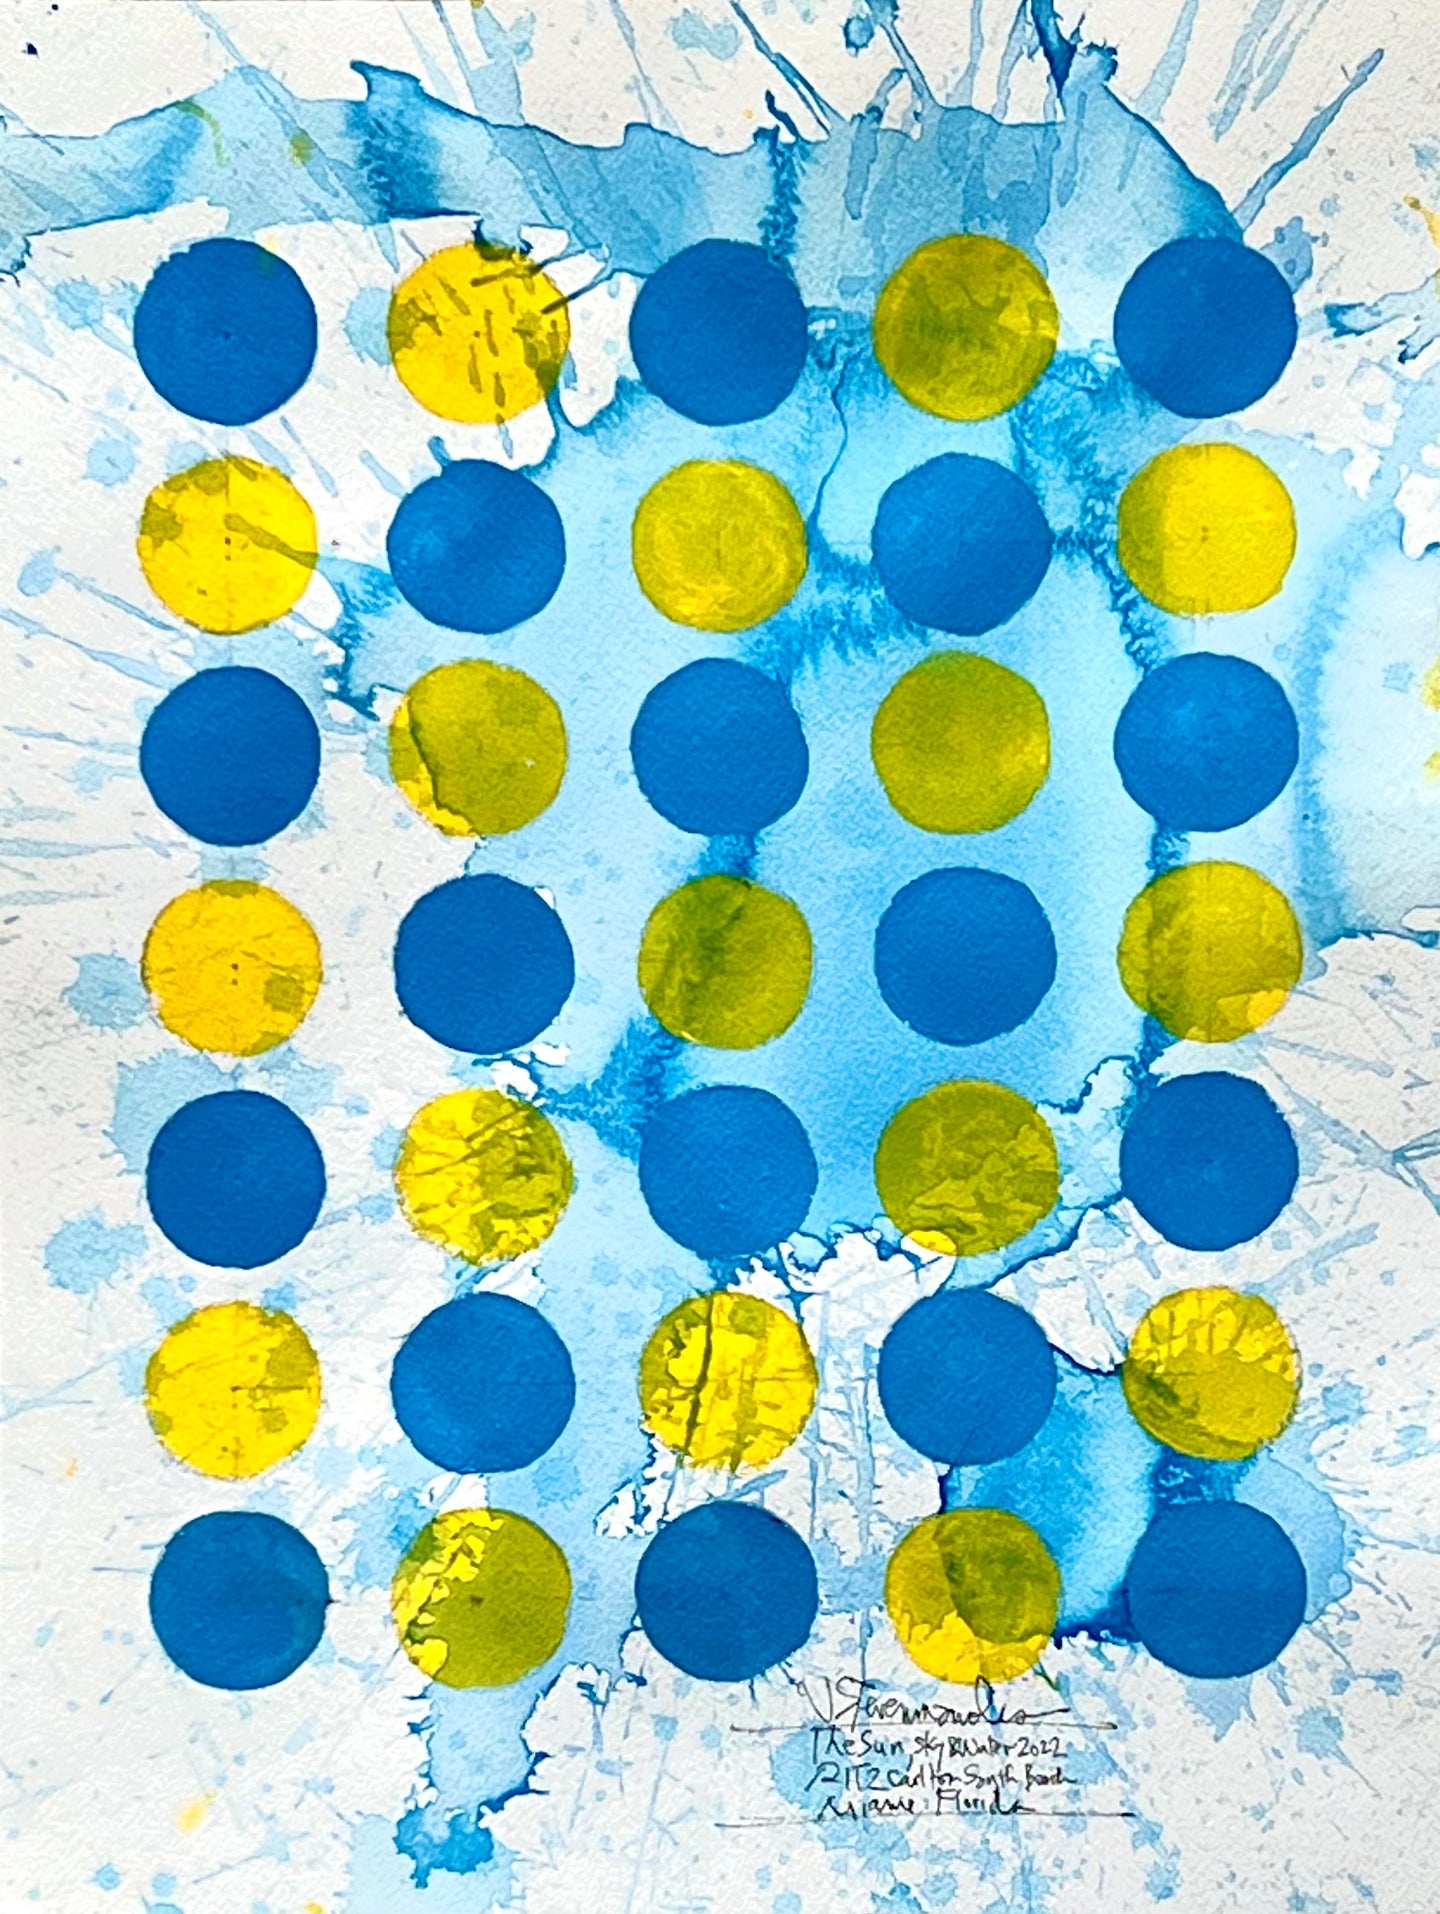 J. Steven Manolis' blue and yellow Abstract painting 